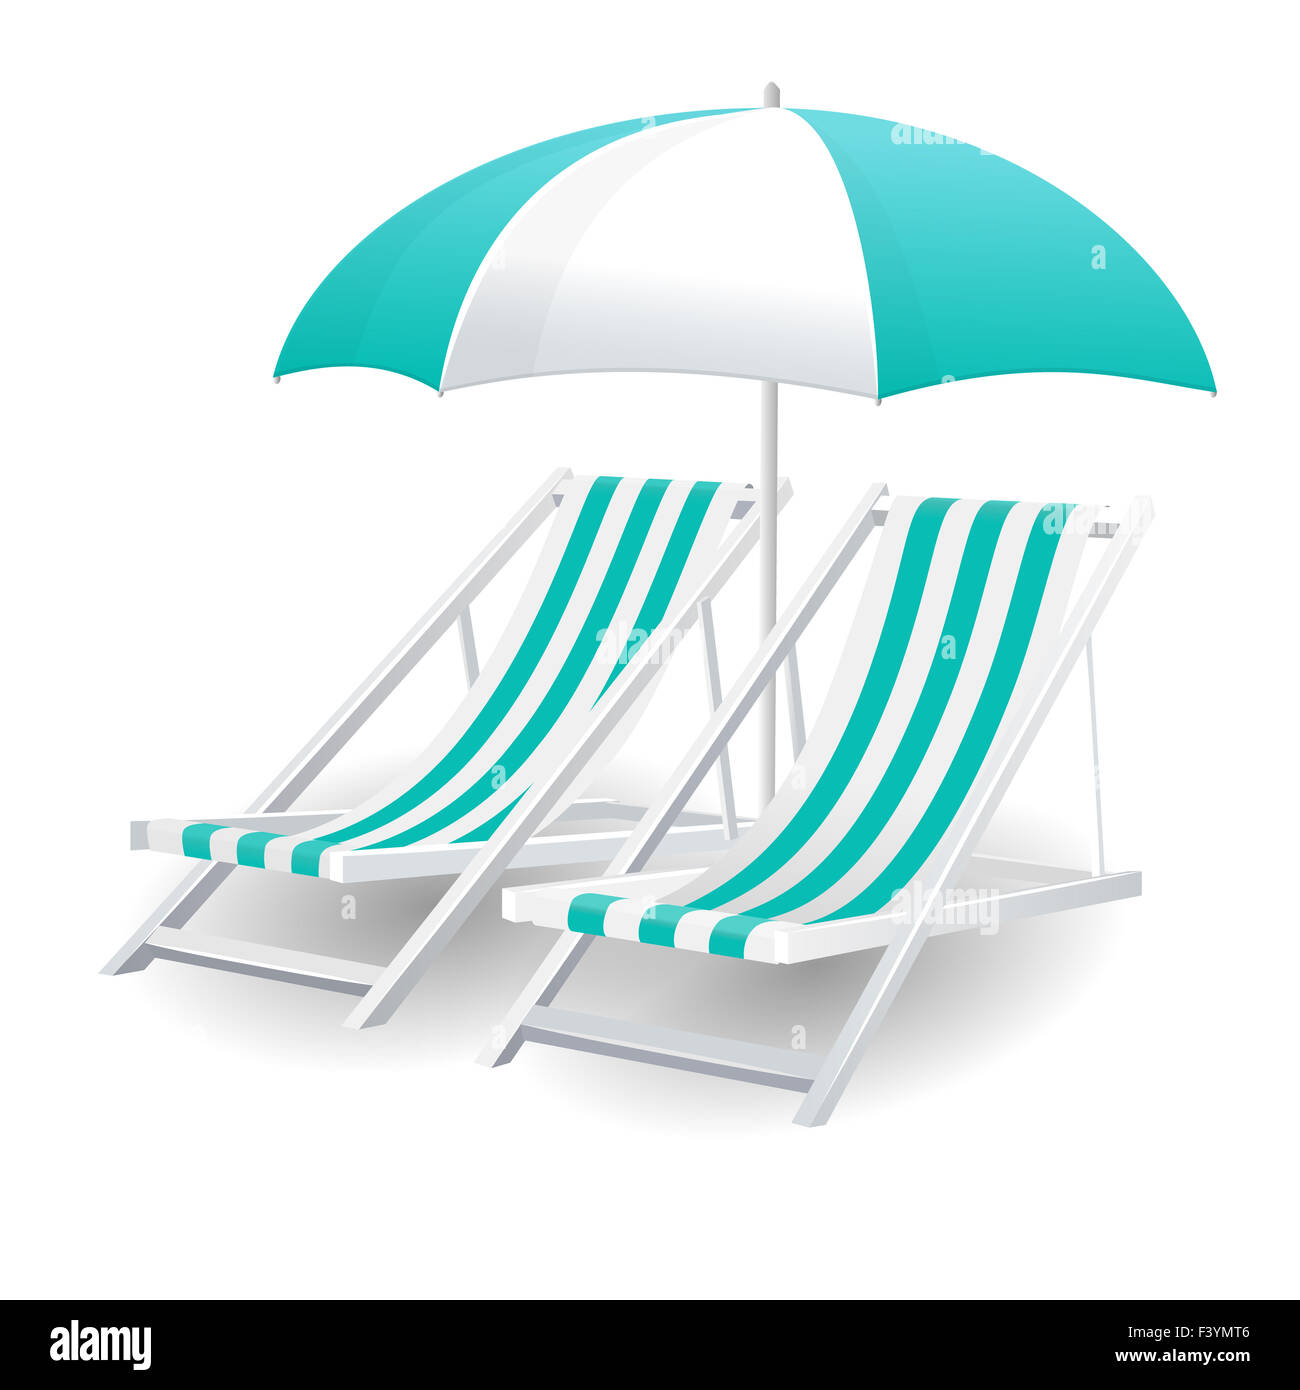 Chair and beach umbrella isolated Stock Photo